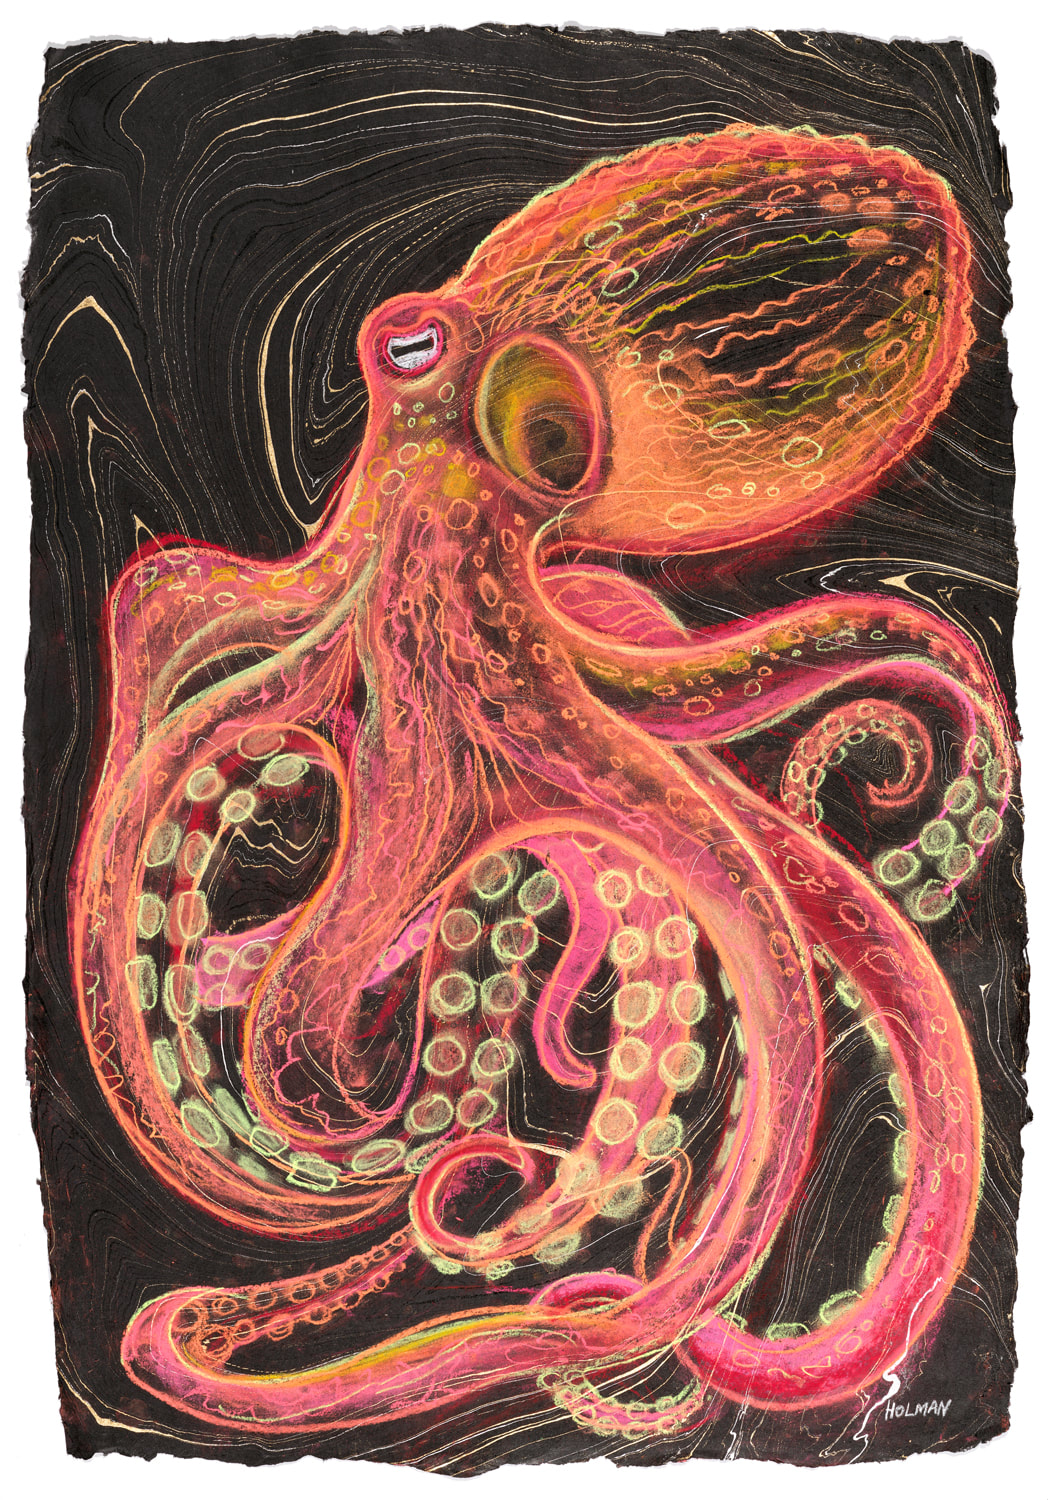 Giant Pacific Octopus - A painting by underwater artist, Stephen Holman 2023. 